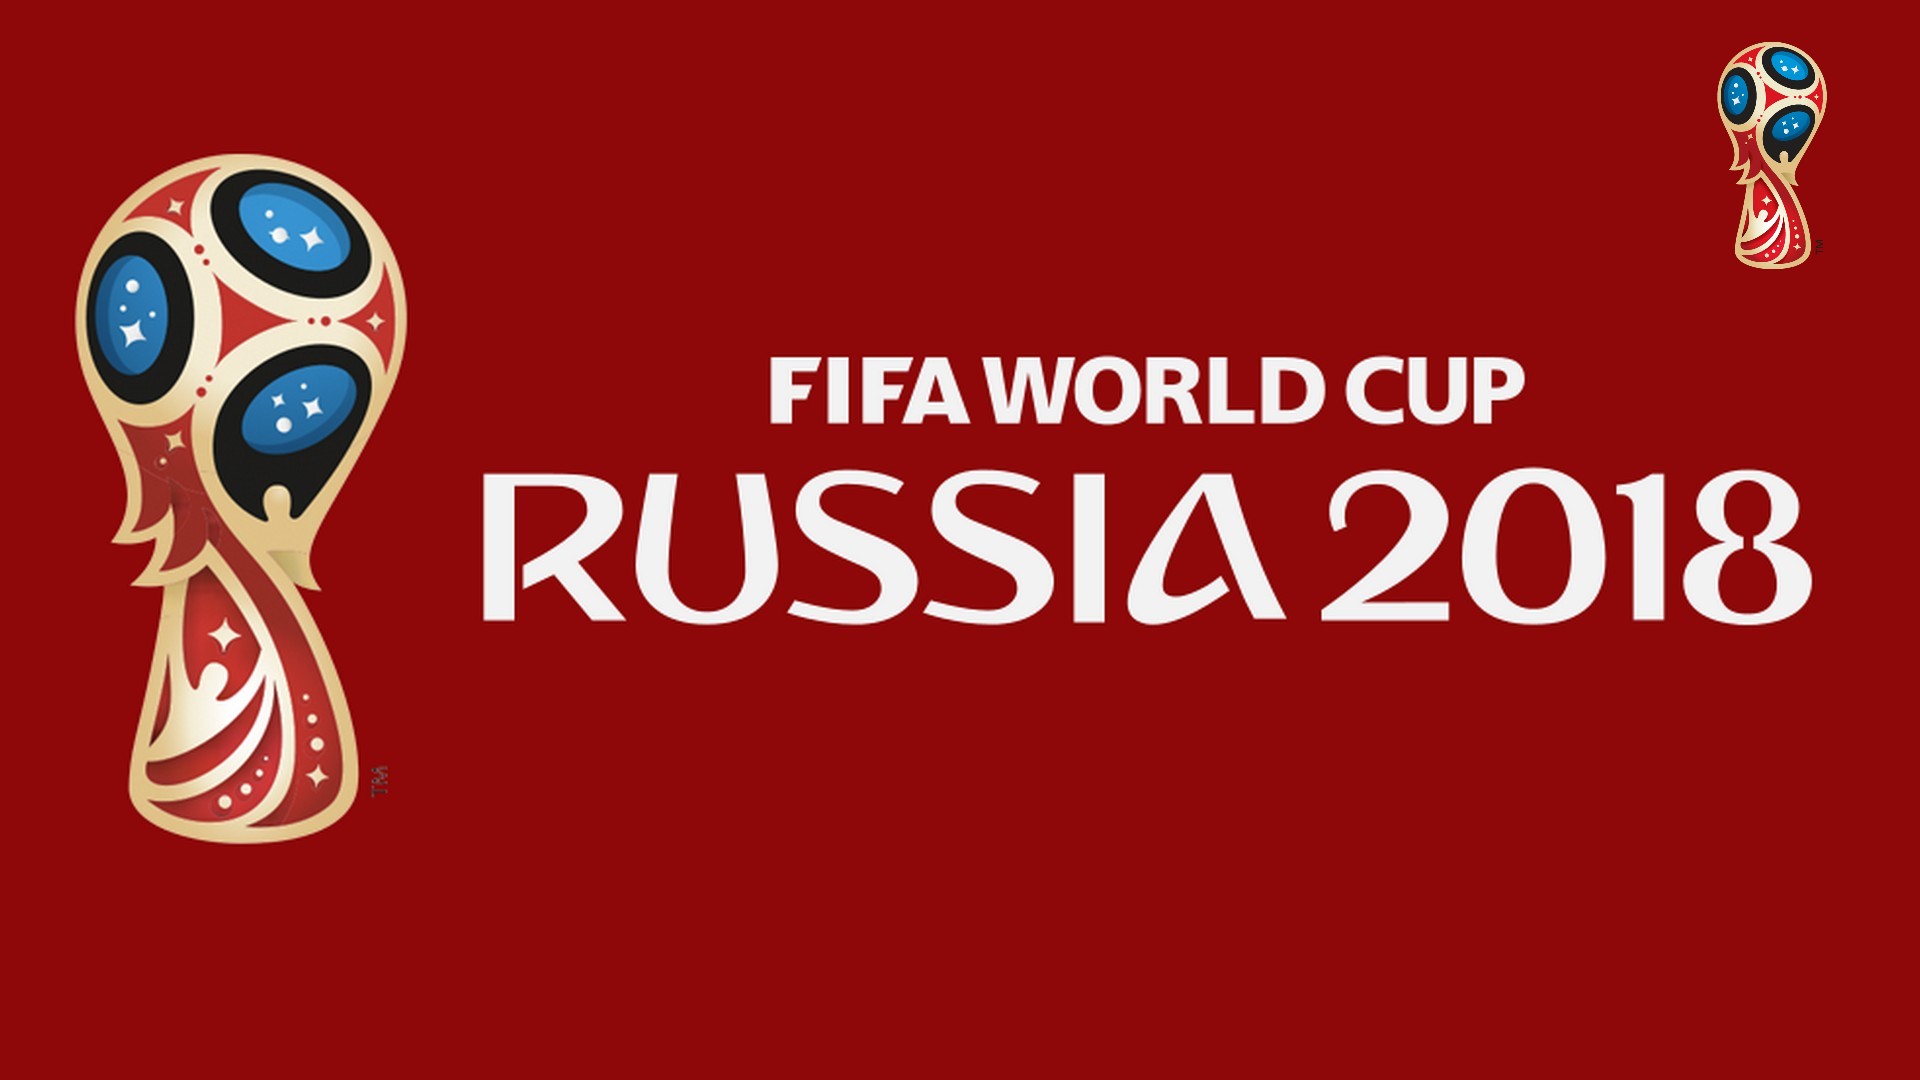 Wallpapers HD 2018 World Cup With Resolution 1920X1080 pixel. You can make this wallpaper for your Mac or Windows Desktop Background, iPhone, Android or Tablet and another Smartphone device for free